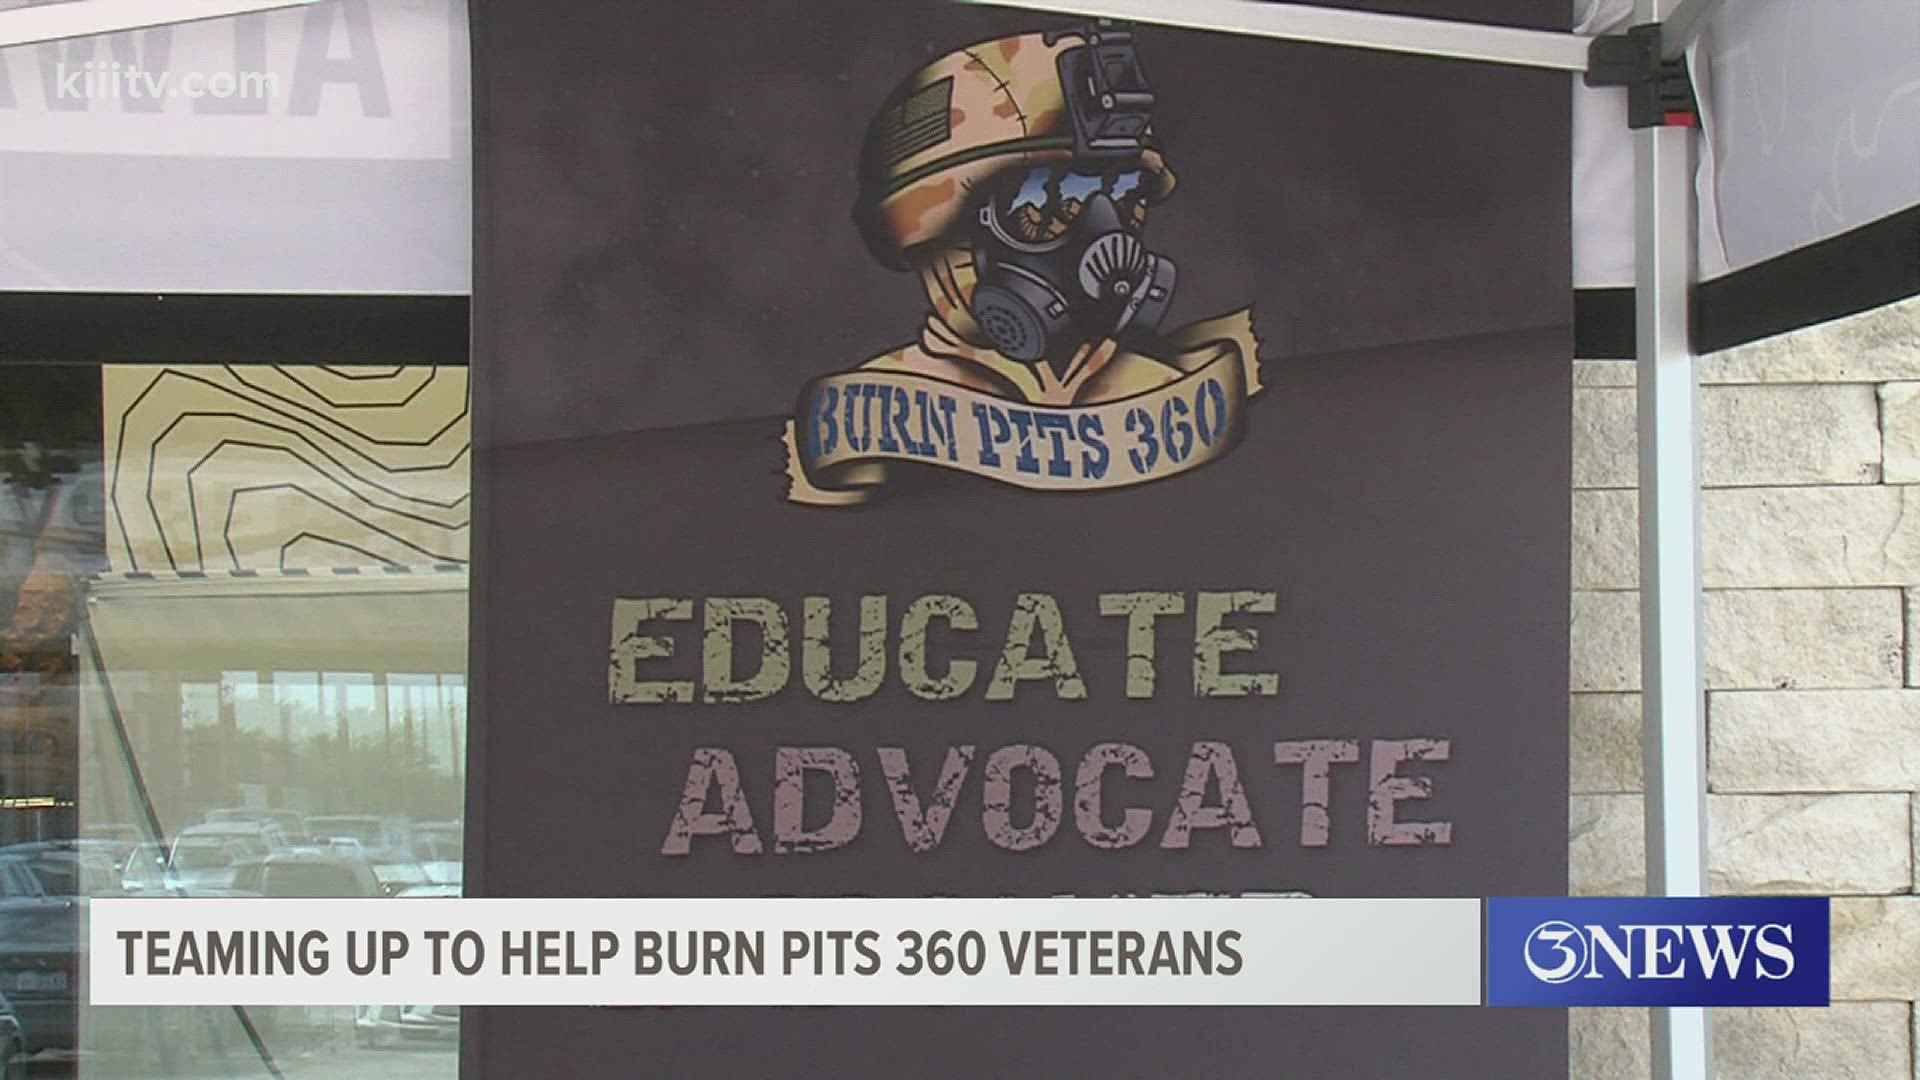 Two groups are coming together to try and help veterans exposed to toxic burn pits in the Middle East while on deployment during the Gulf Wars.